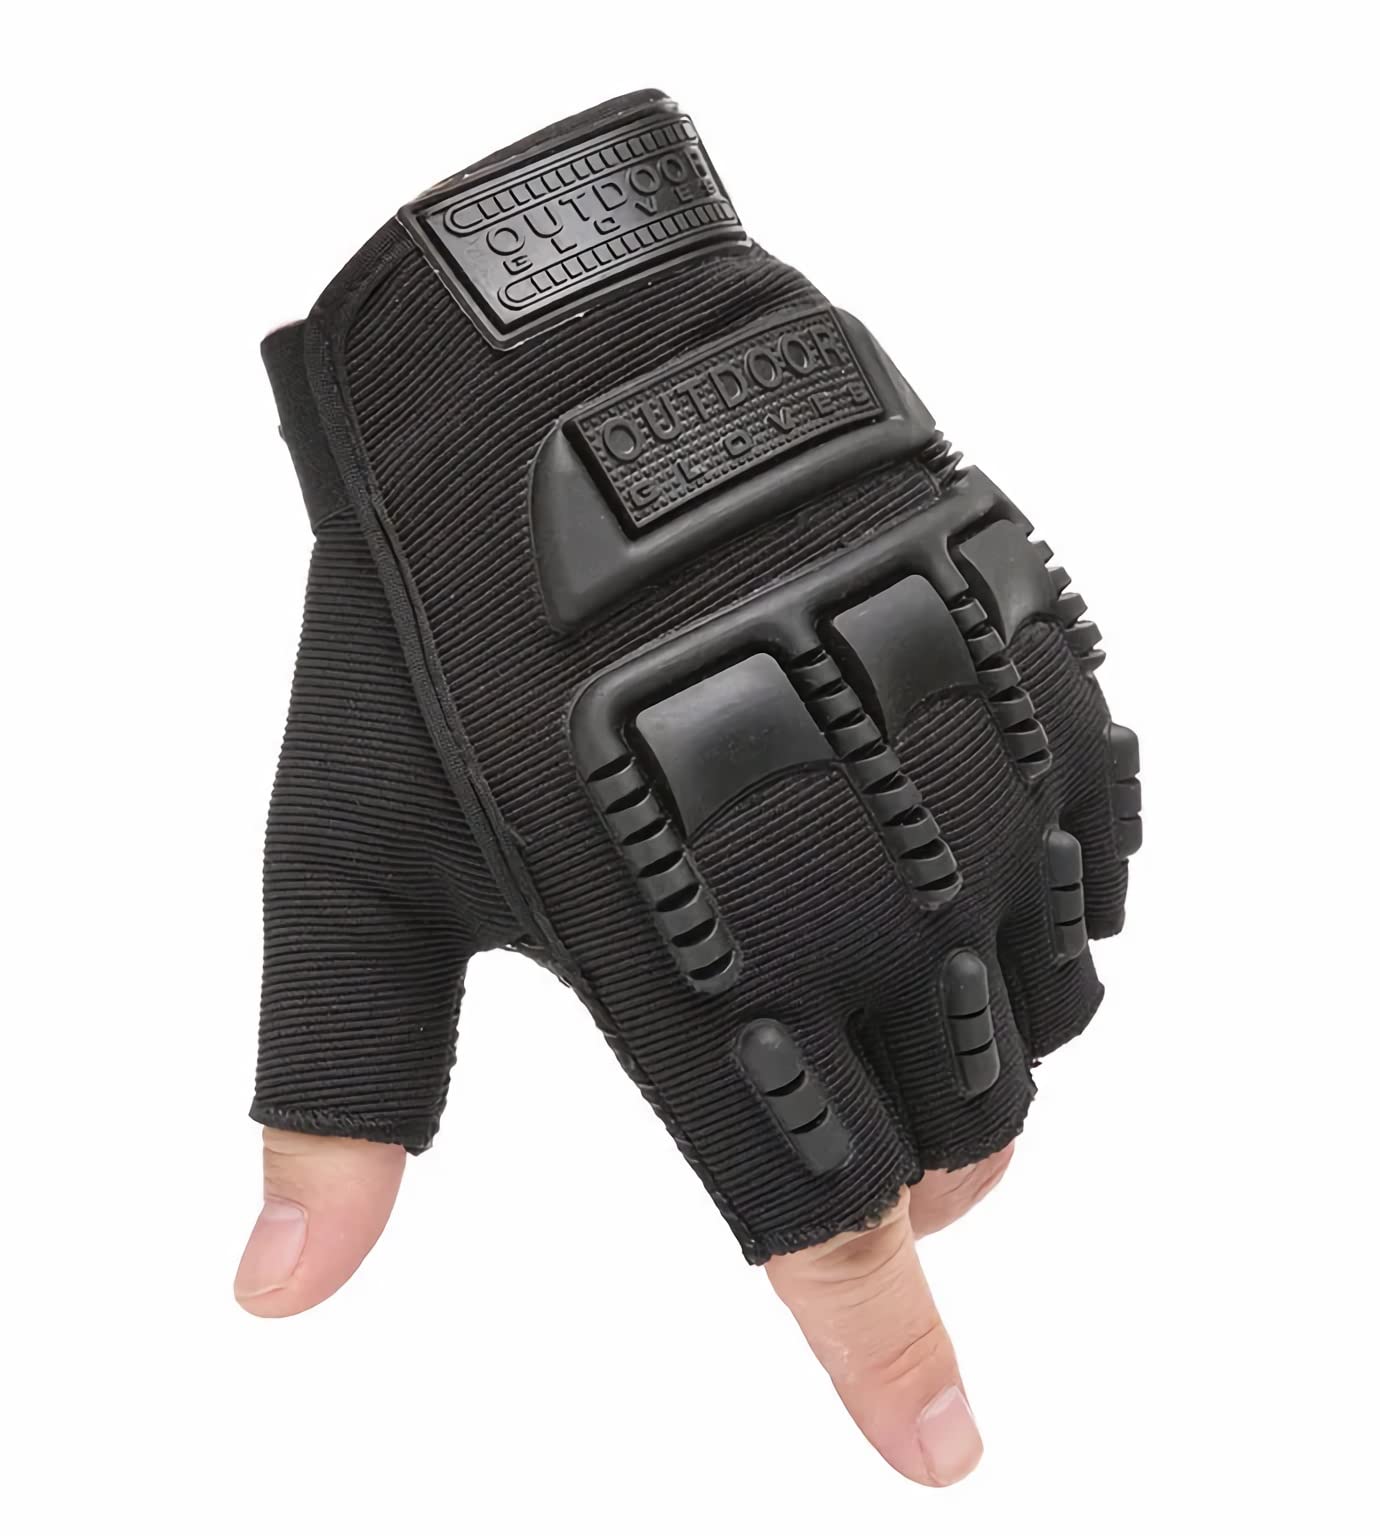 Fingerless Tactical Shooting Gloves Flash Sales